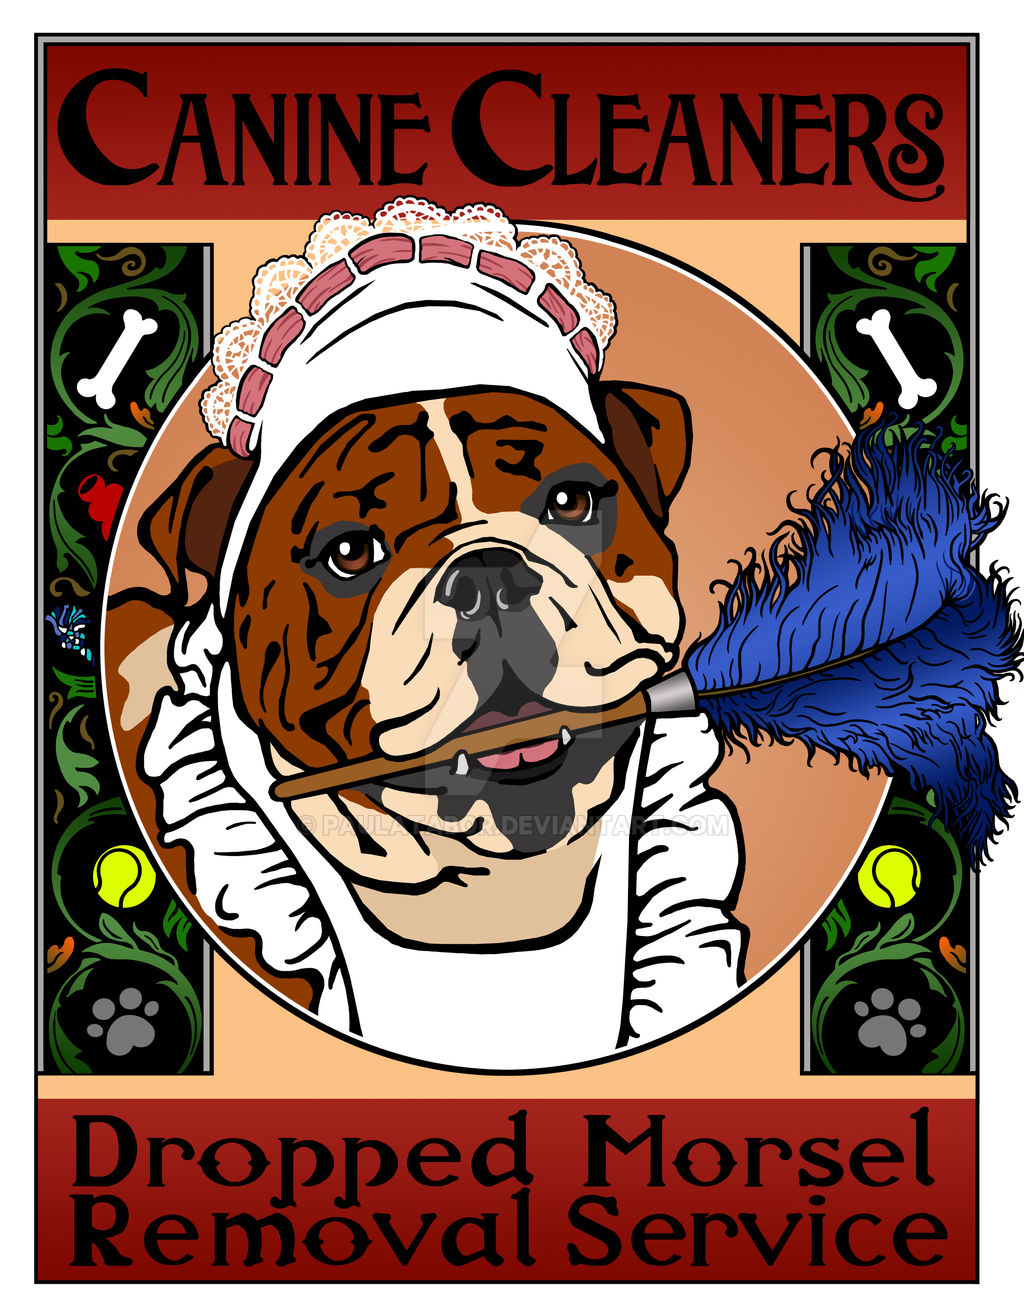 Canine Cleaners Humorous Dog Illustration